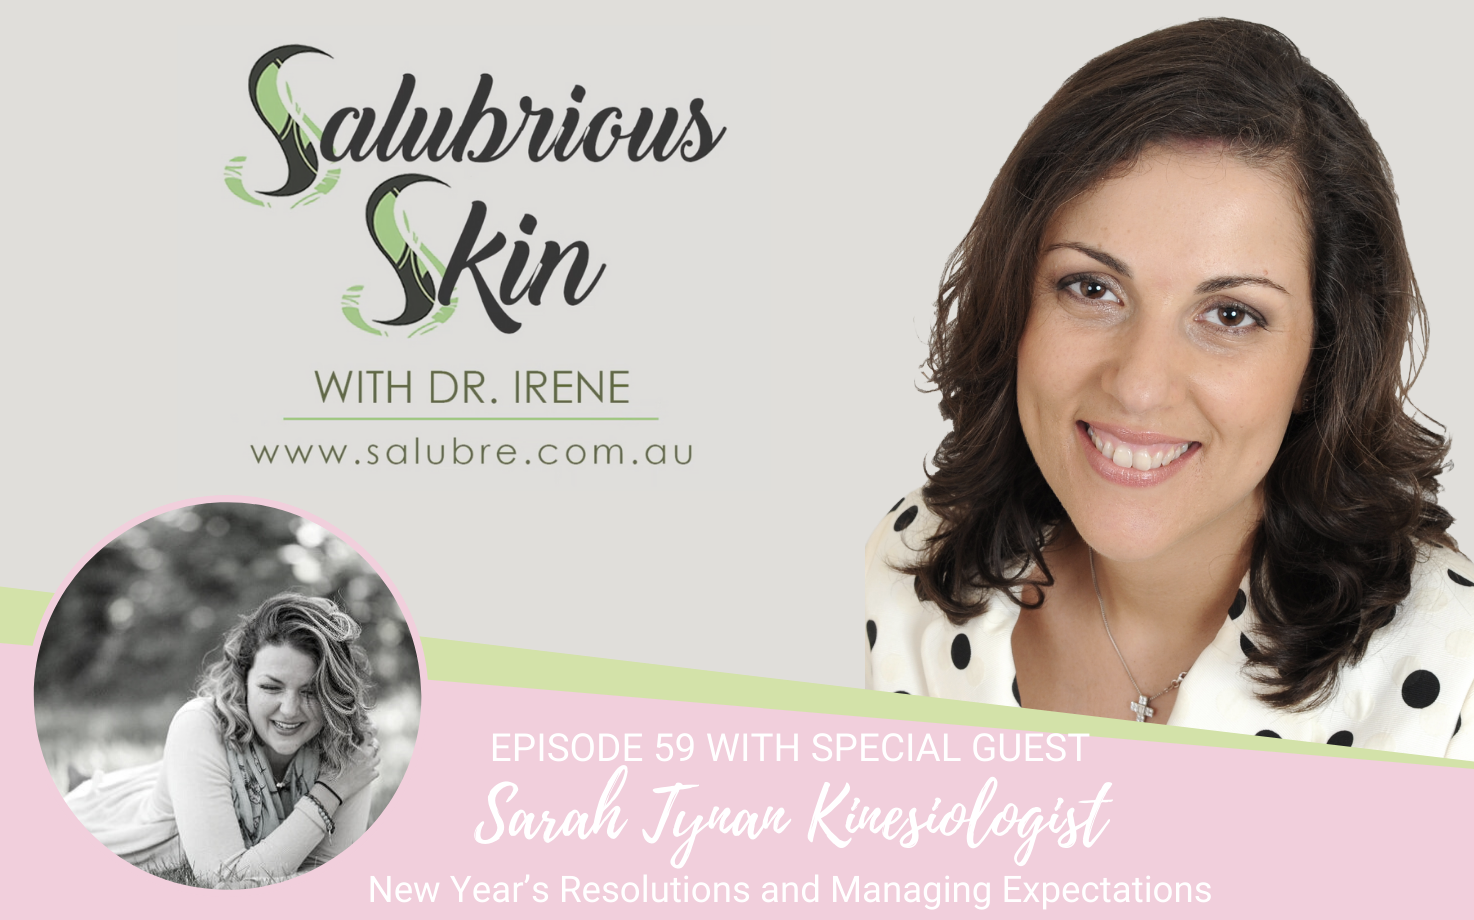 Podcast 59: New Year's Resolutions and Managing Expectations - Interview with Sarah Tynan